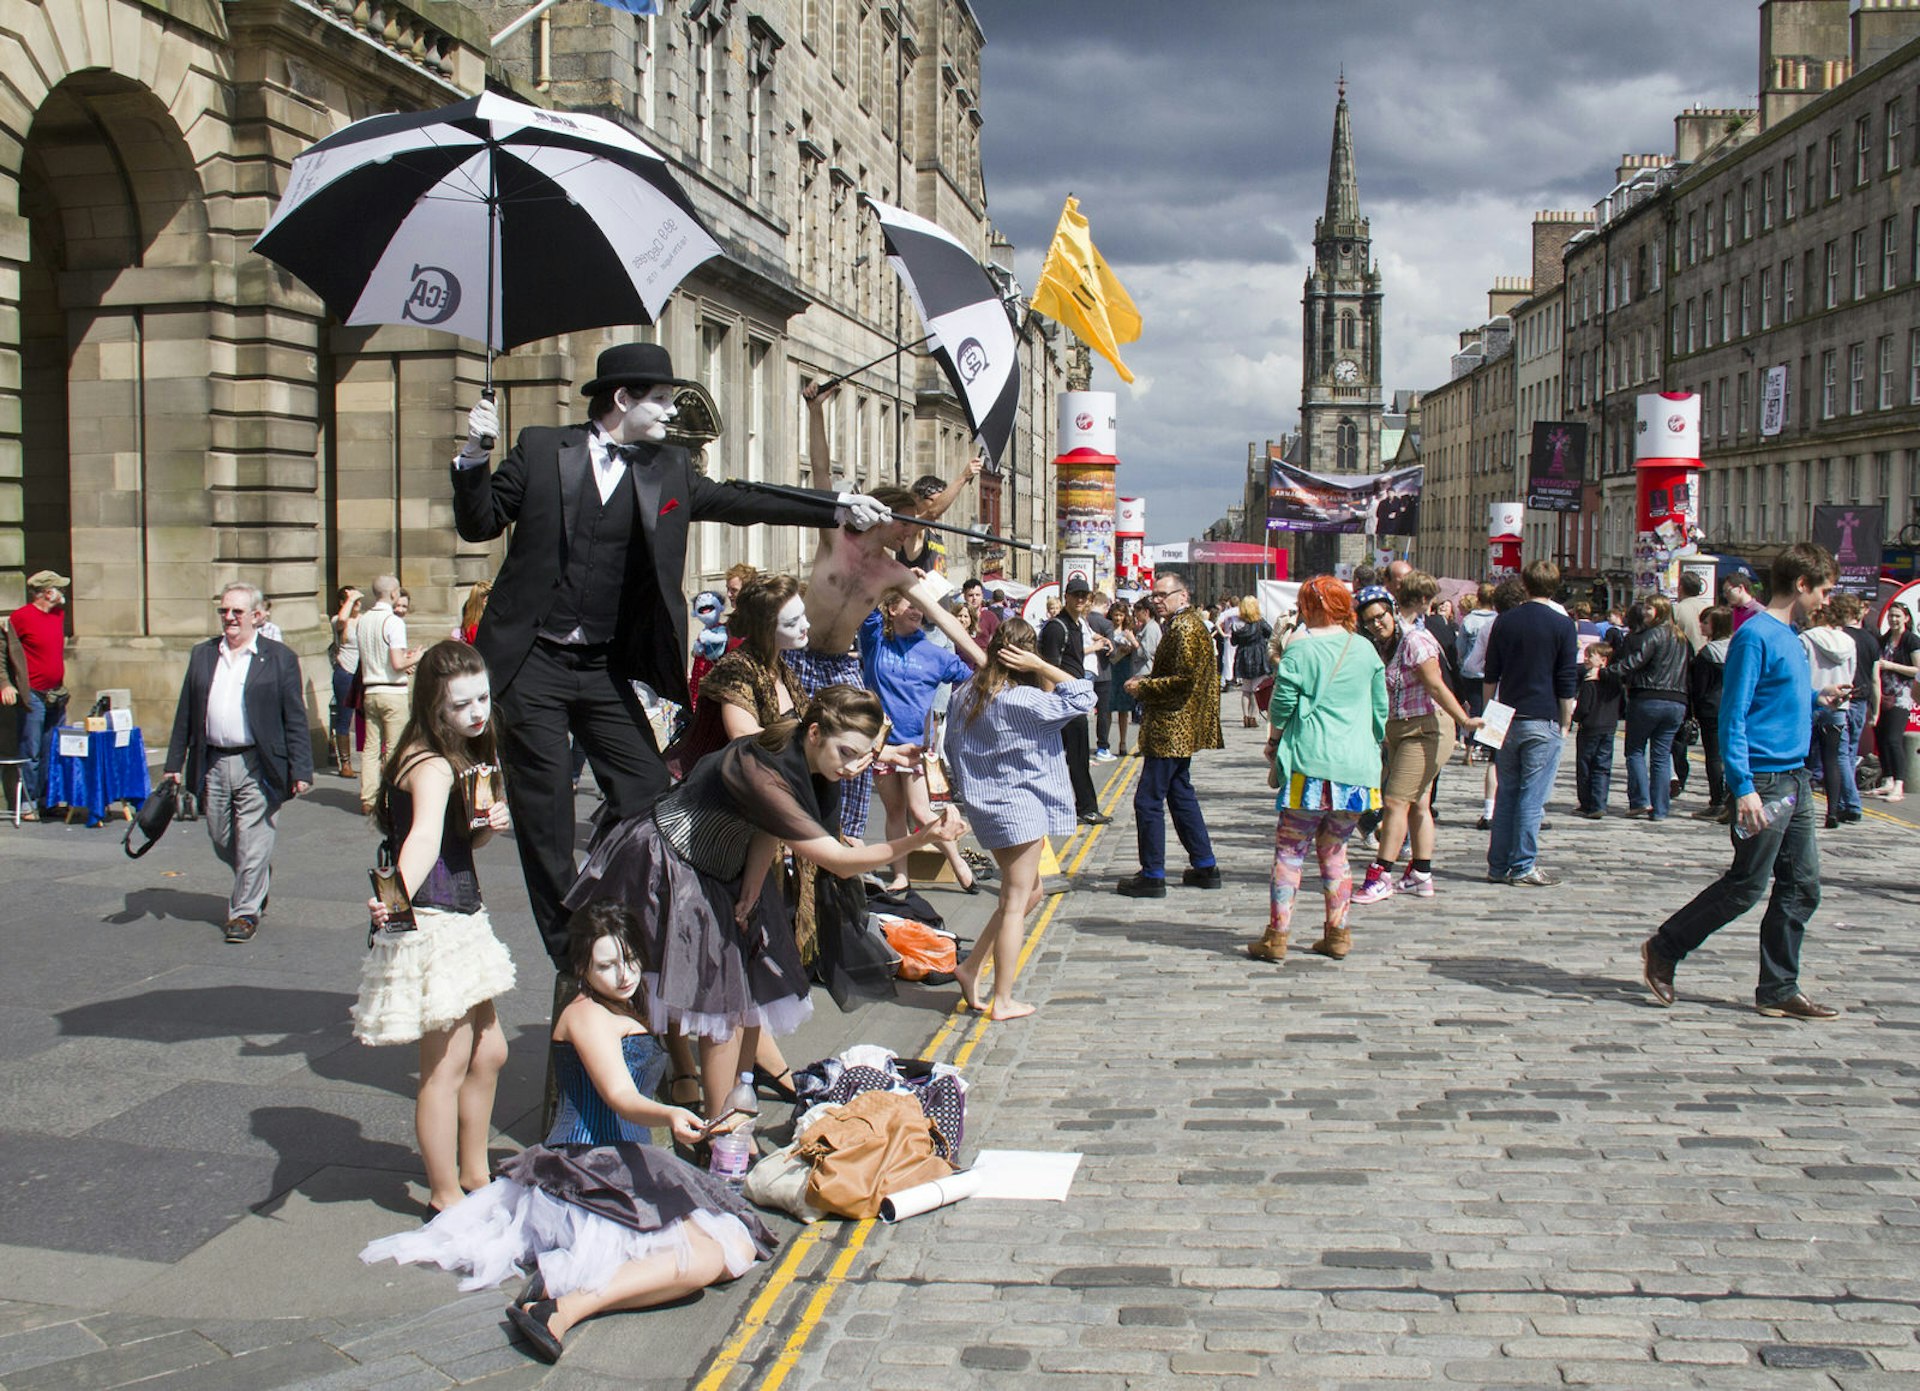 The Royal Mile buzzes with life during the Festival © Jan Kranendonk / Shutterstock